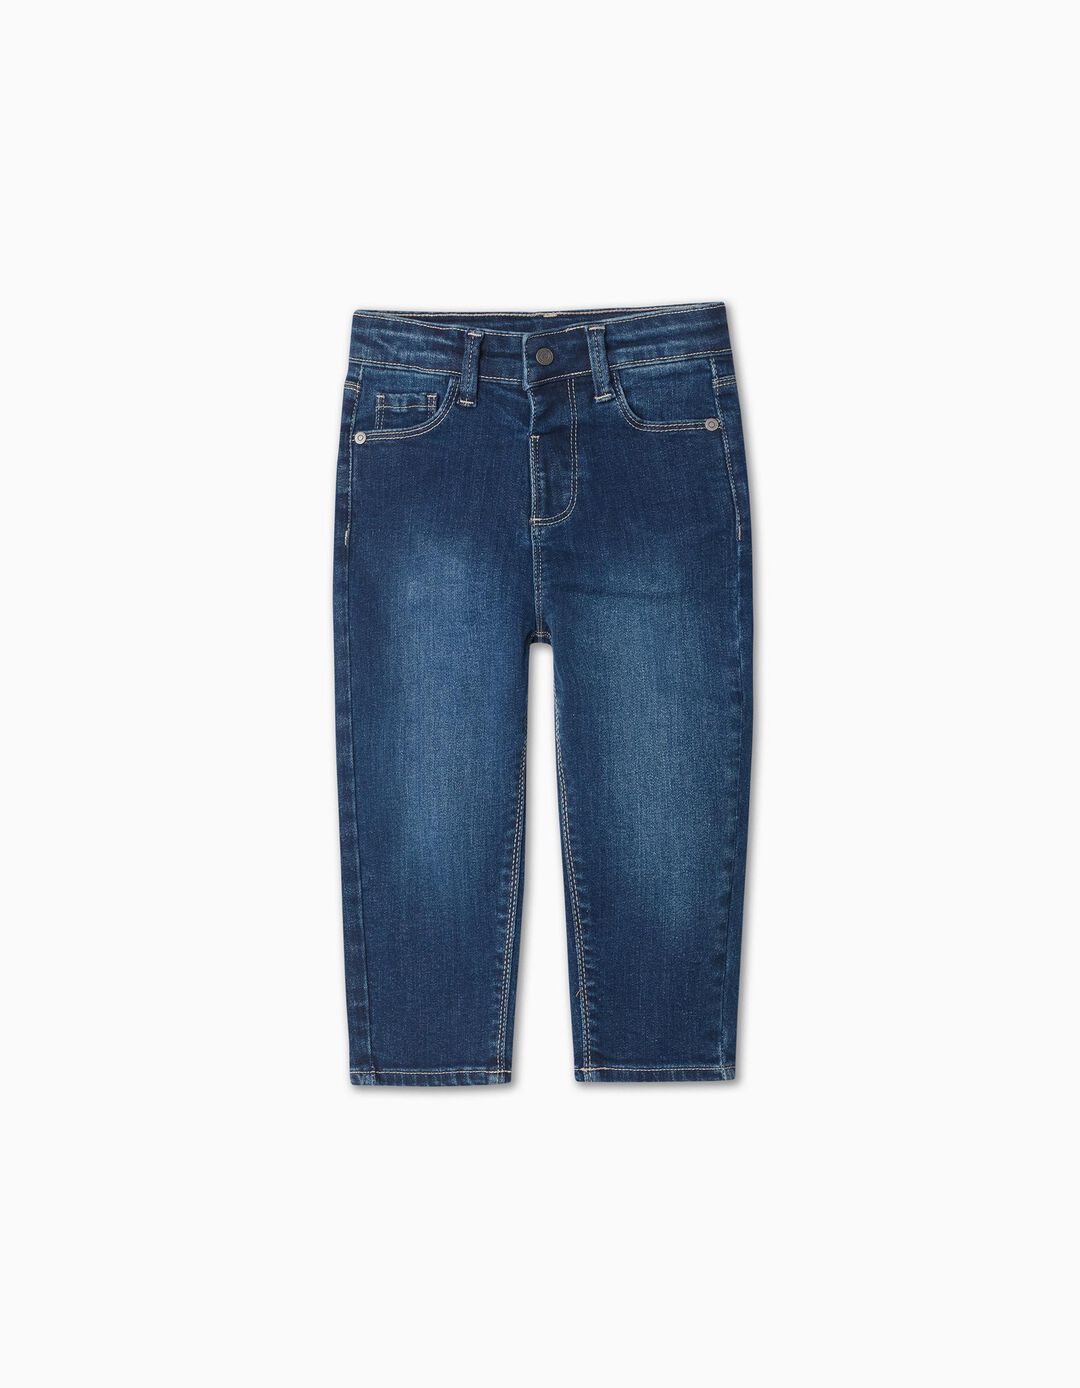 'Mom Fit' Jeans, Baby Girl, Blue